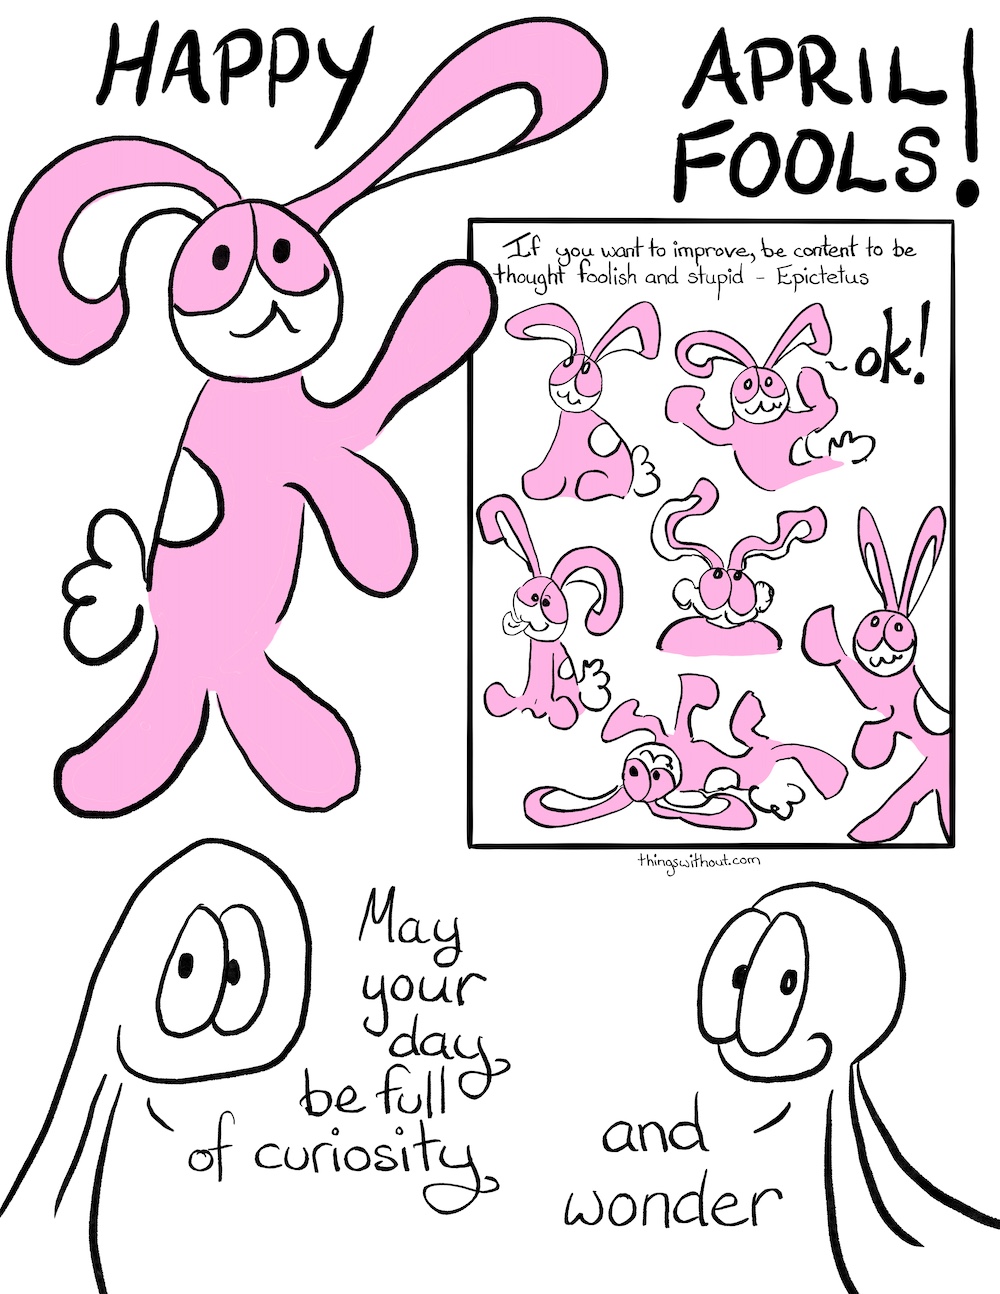 Webcomic. Happy Aprils Fools! If you want to improve, be content to be thought foolish and stupid – Epictetus Bunson looks up. Bunson: ok! Bunson pulls a series of foolish faces and gestures, sticking his tongue out and rolling on his back. Thing 1: May your day be full of curiosity. Thing 2: and wonder